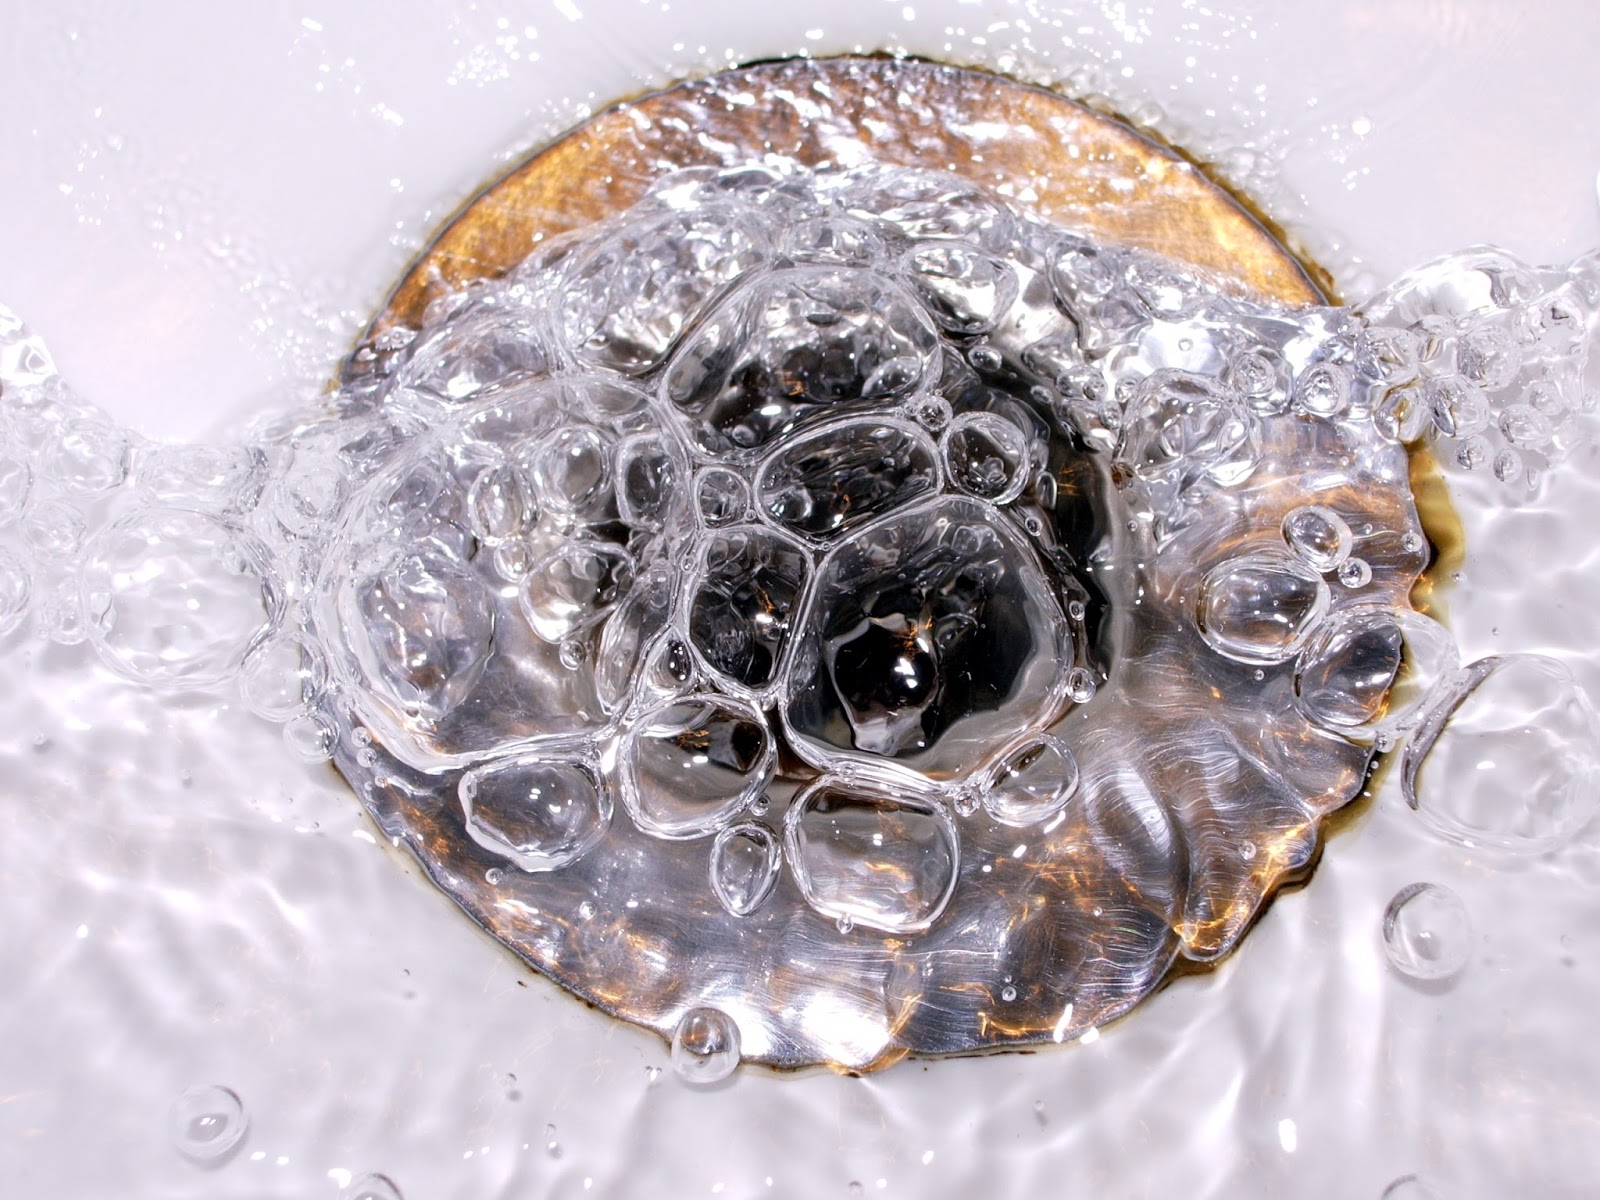 How to Unclog a Shower Drain Clogged with Hair - Gold Coast Plumbing Company